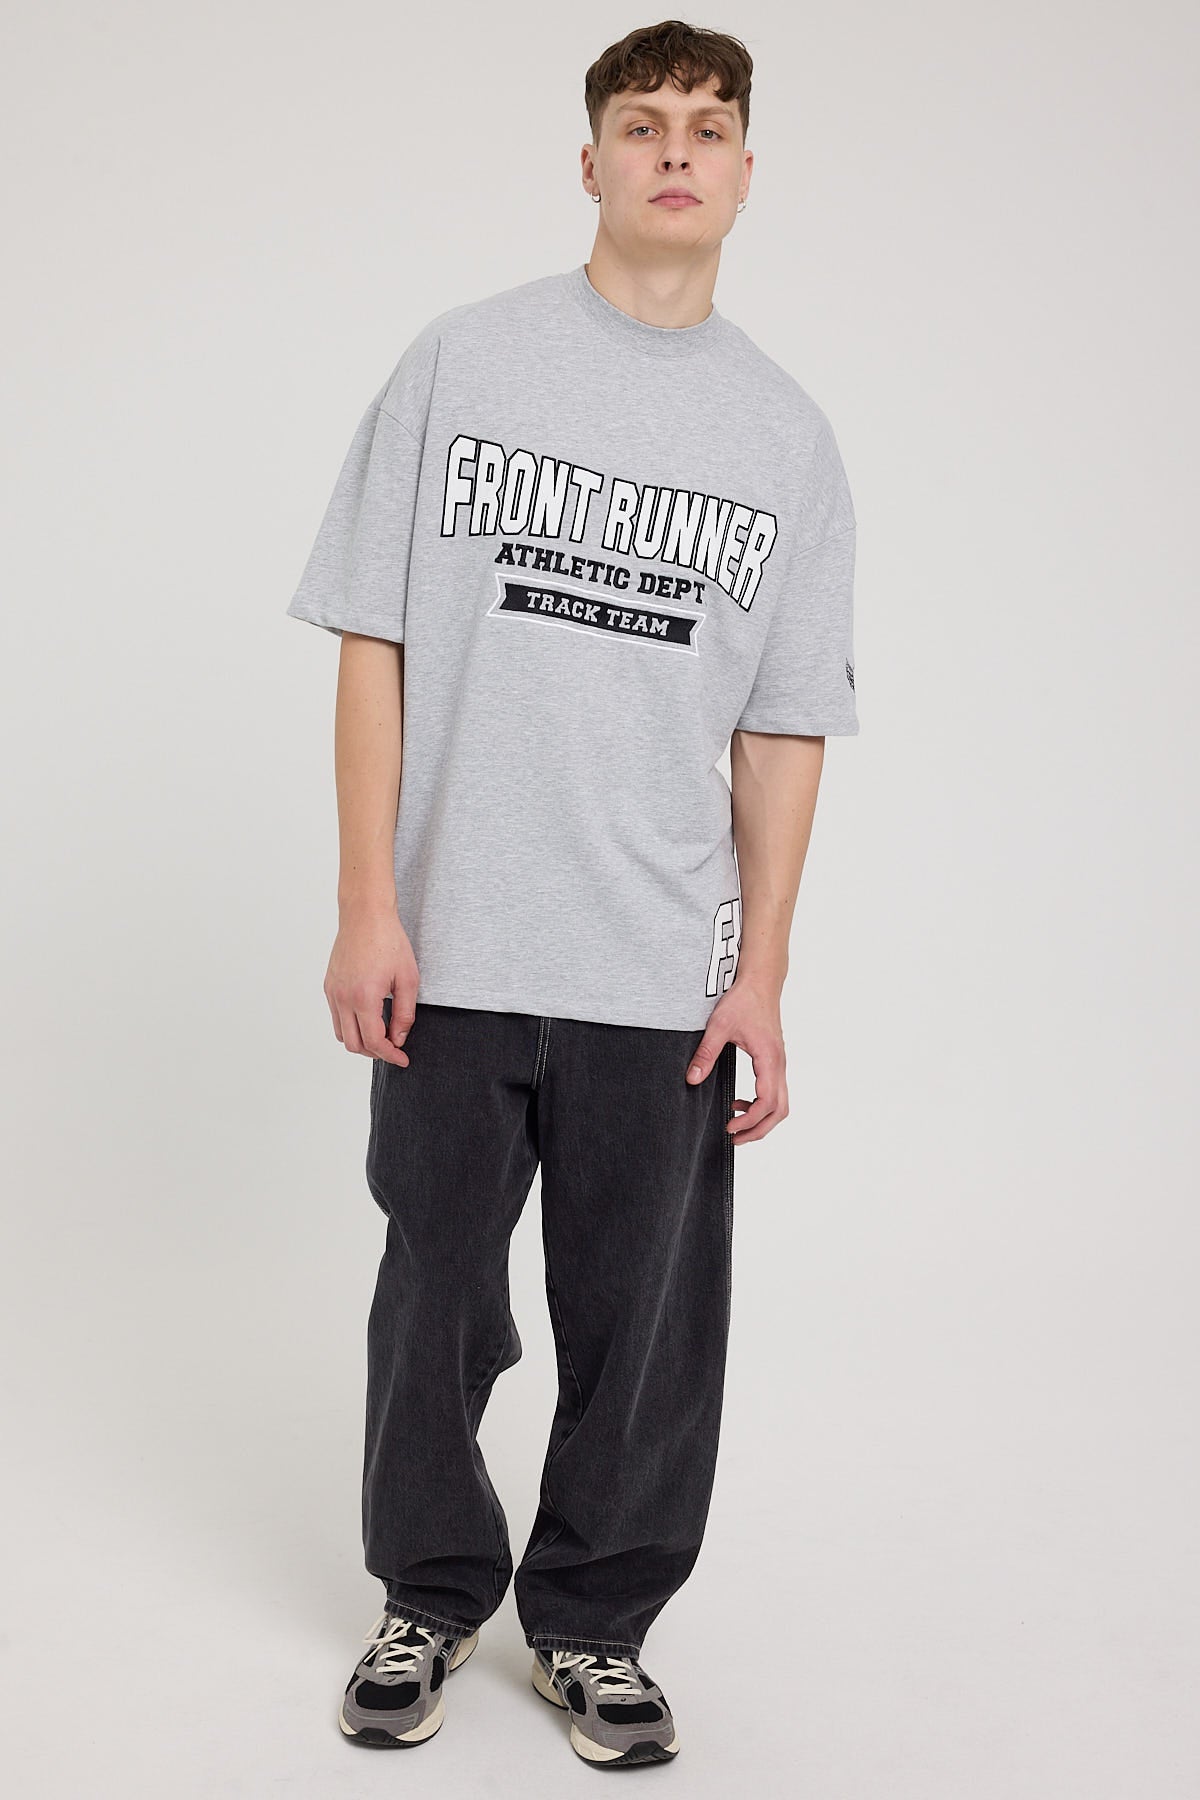 Front Runner Athletic Department Tee Grey Marle